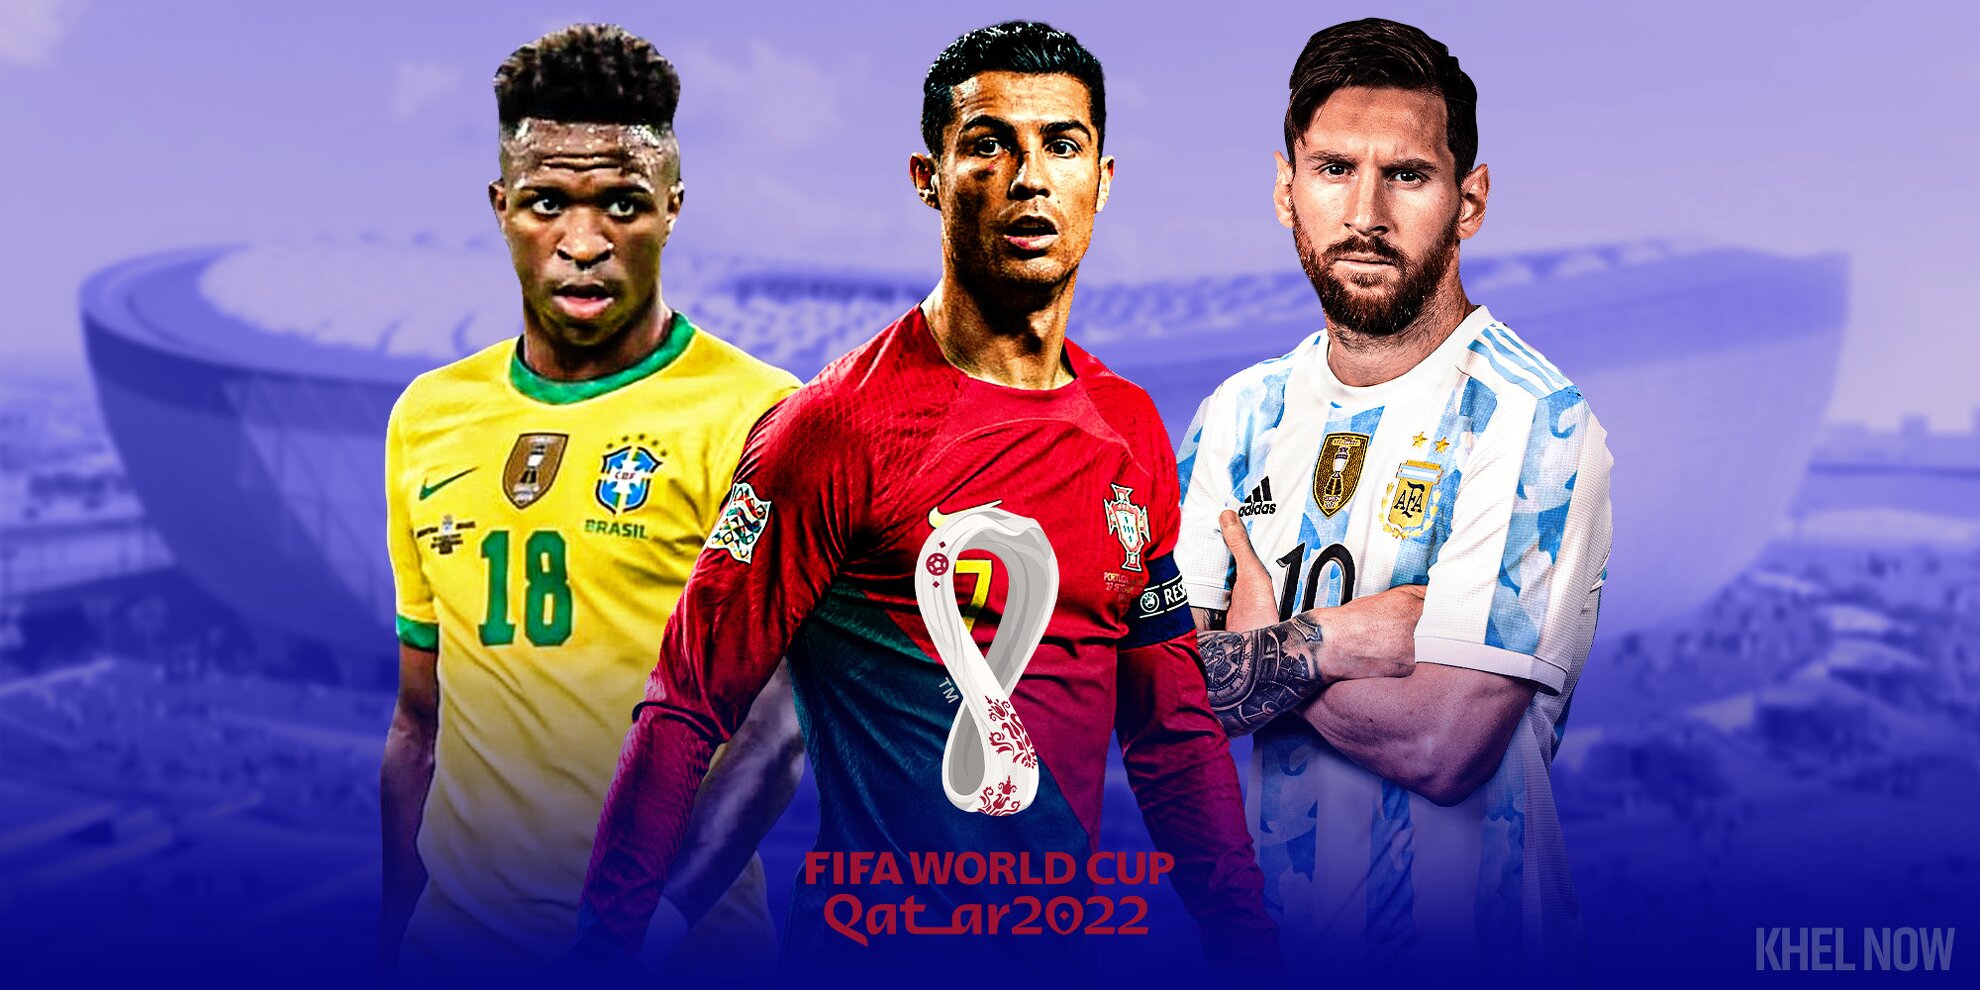 TOP TEN PLAYERS WHO REACHED THE QUARTER-FINALS OF THE FIFA WORLD CUP 2022